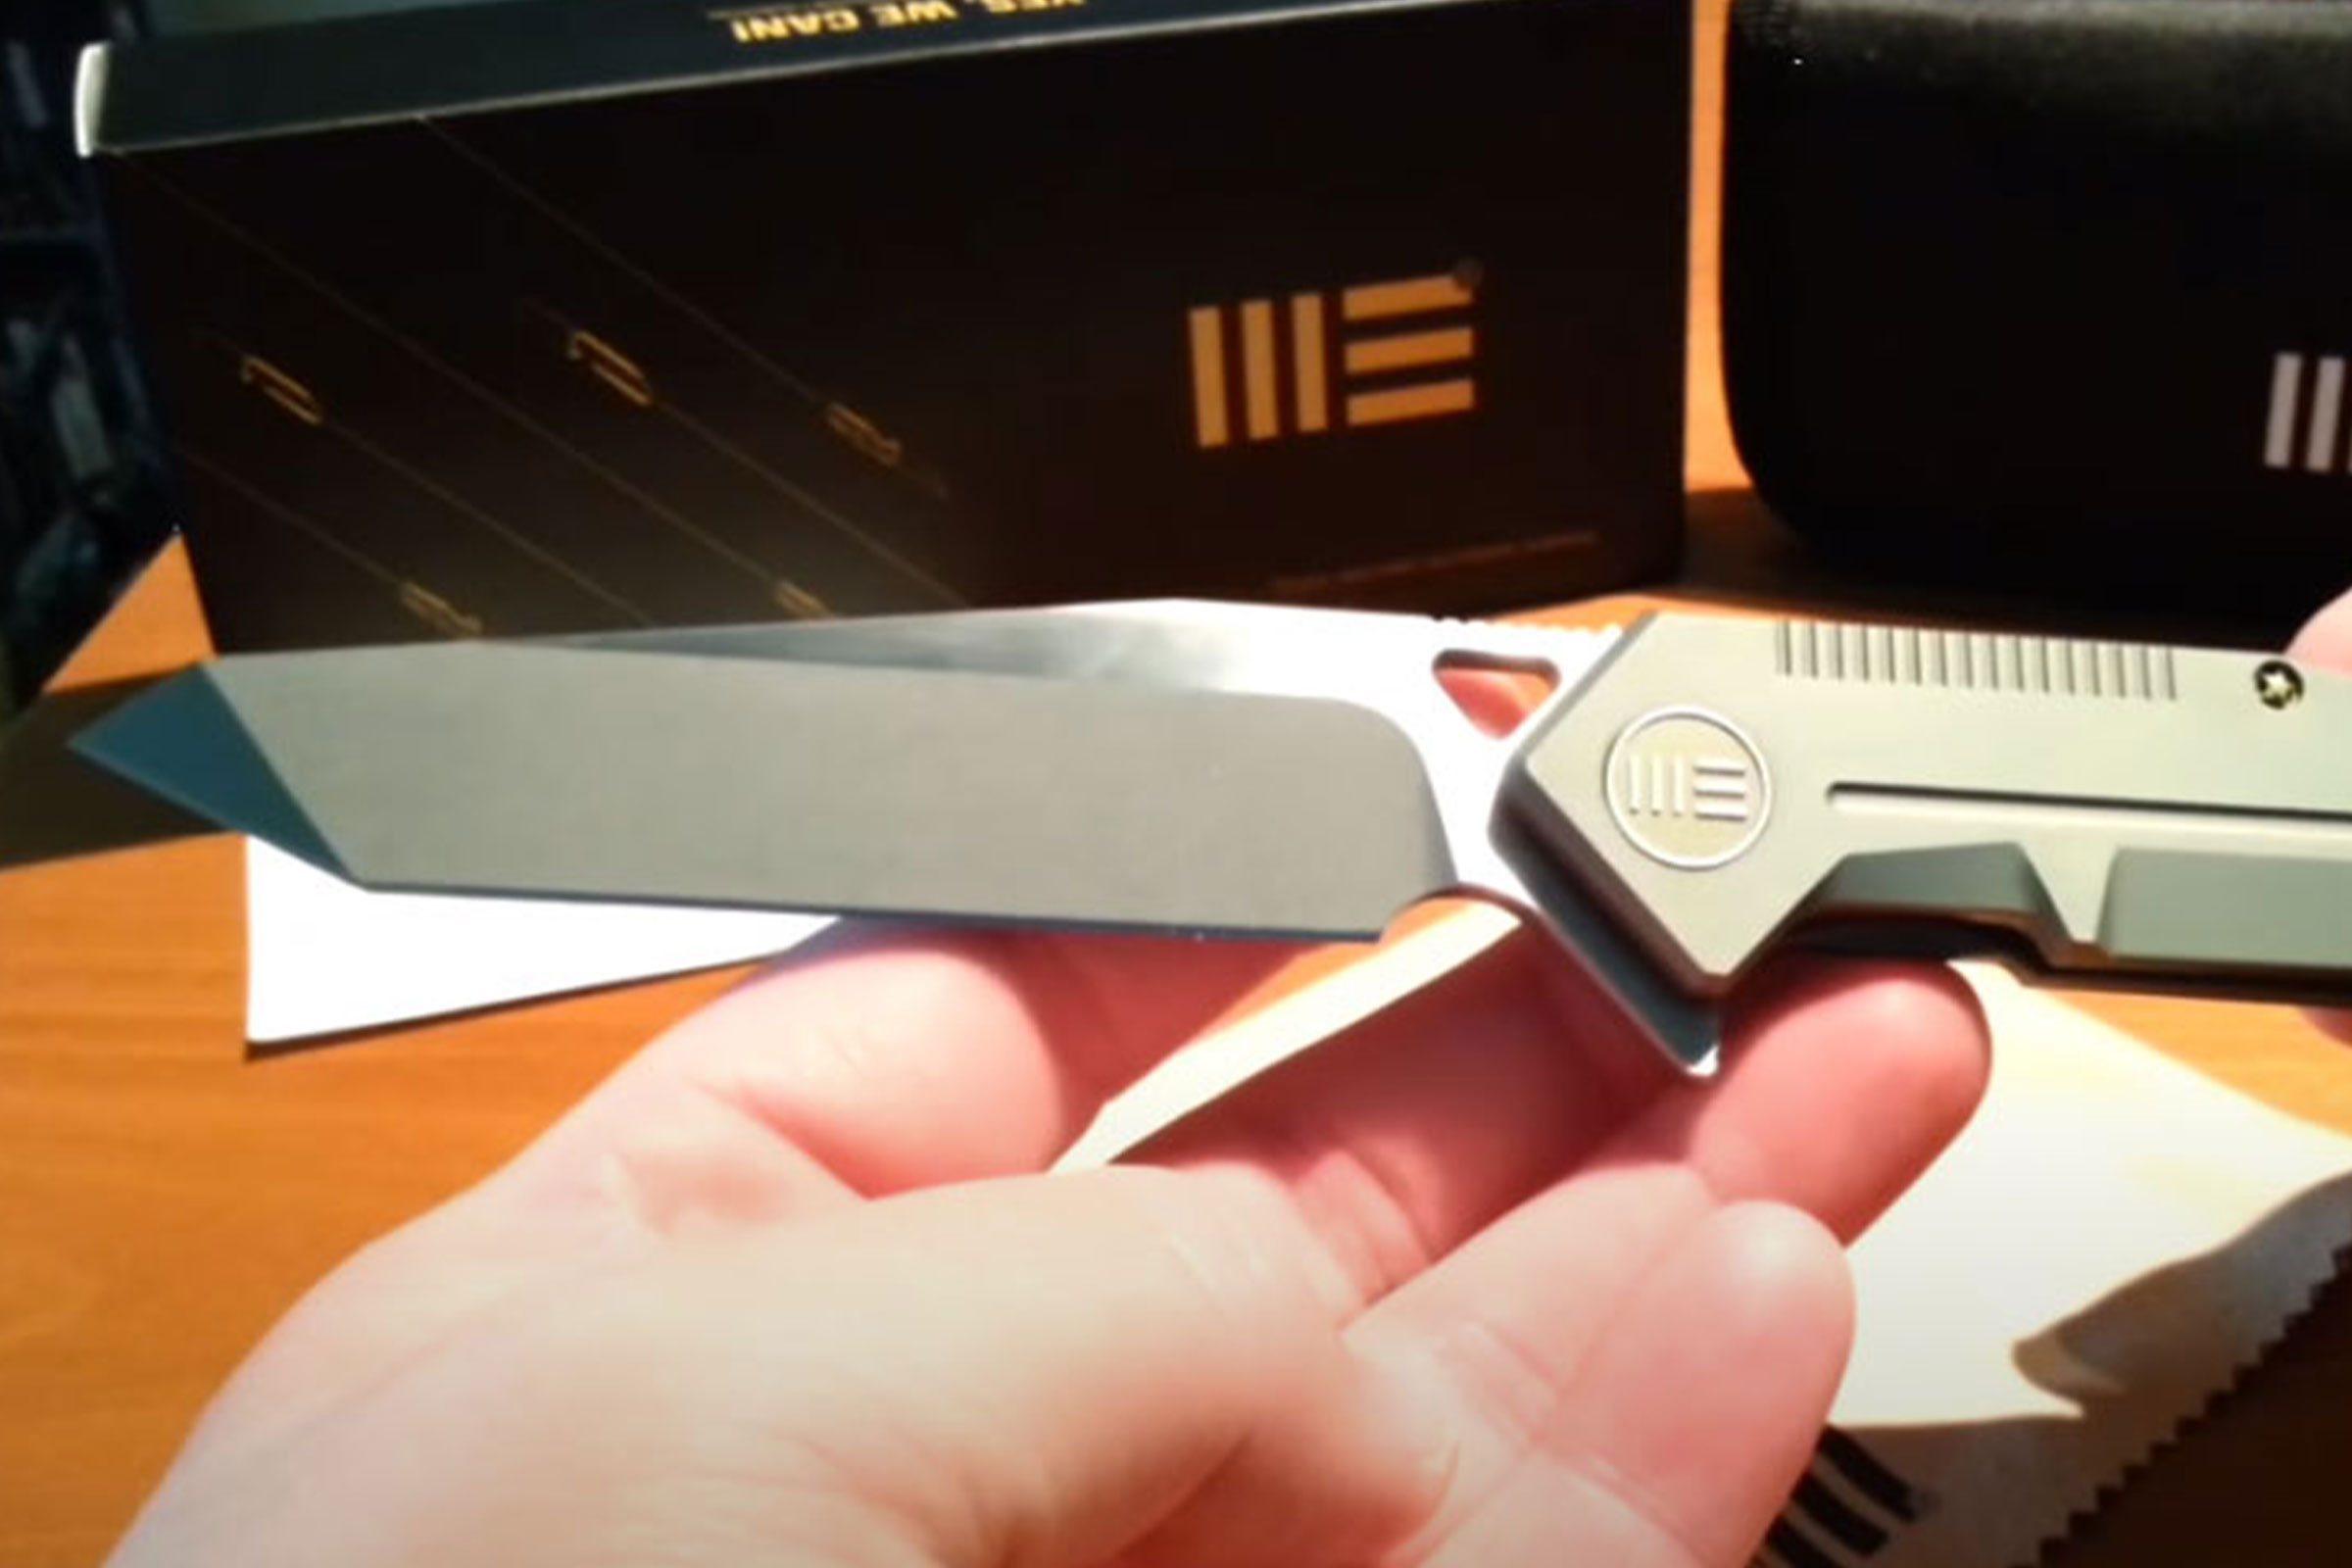 We Knife 610, We Knife 610 review